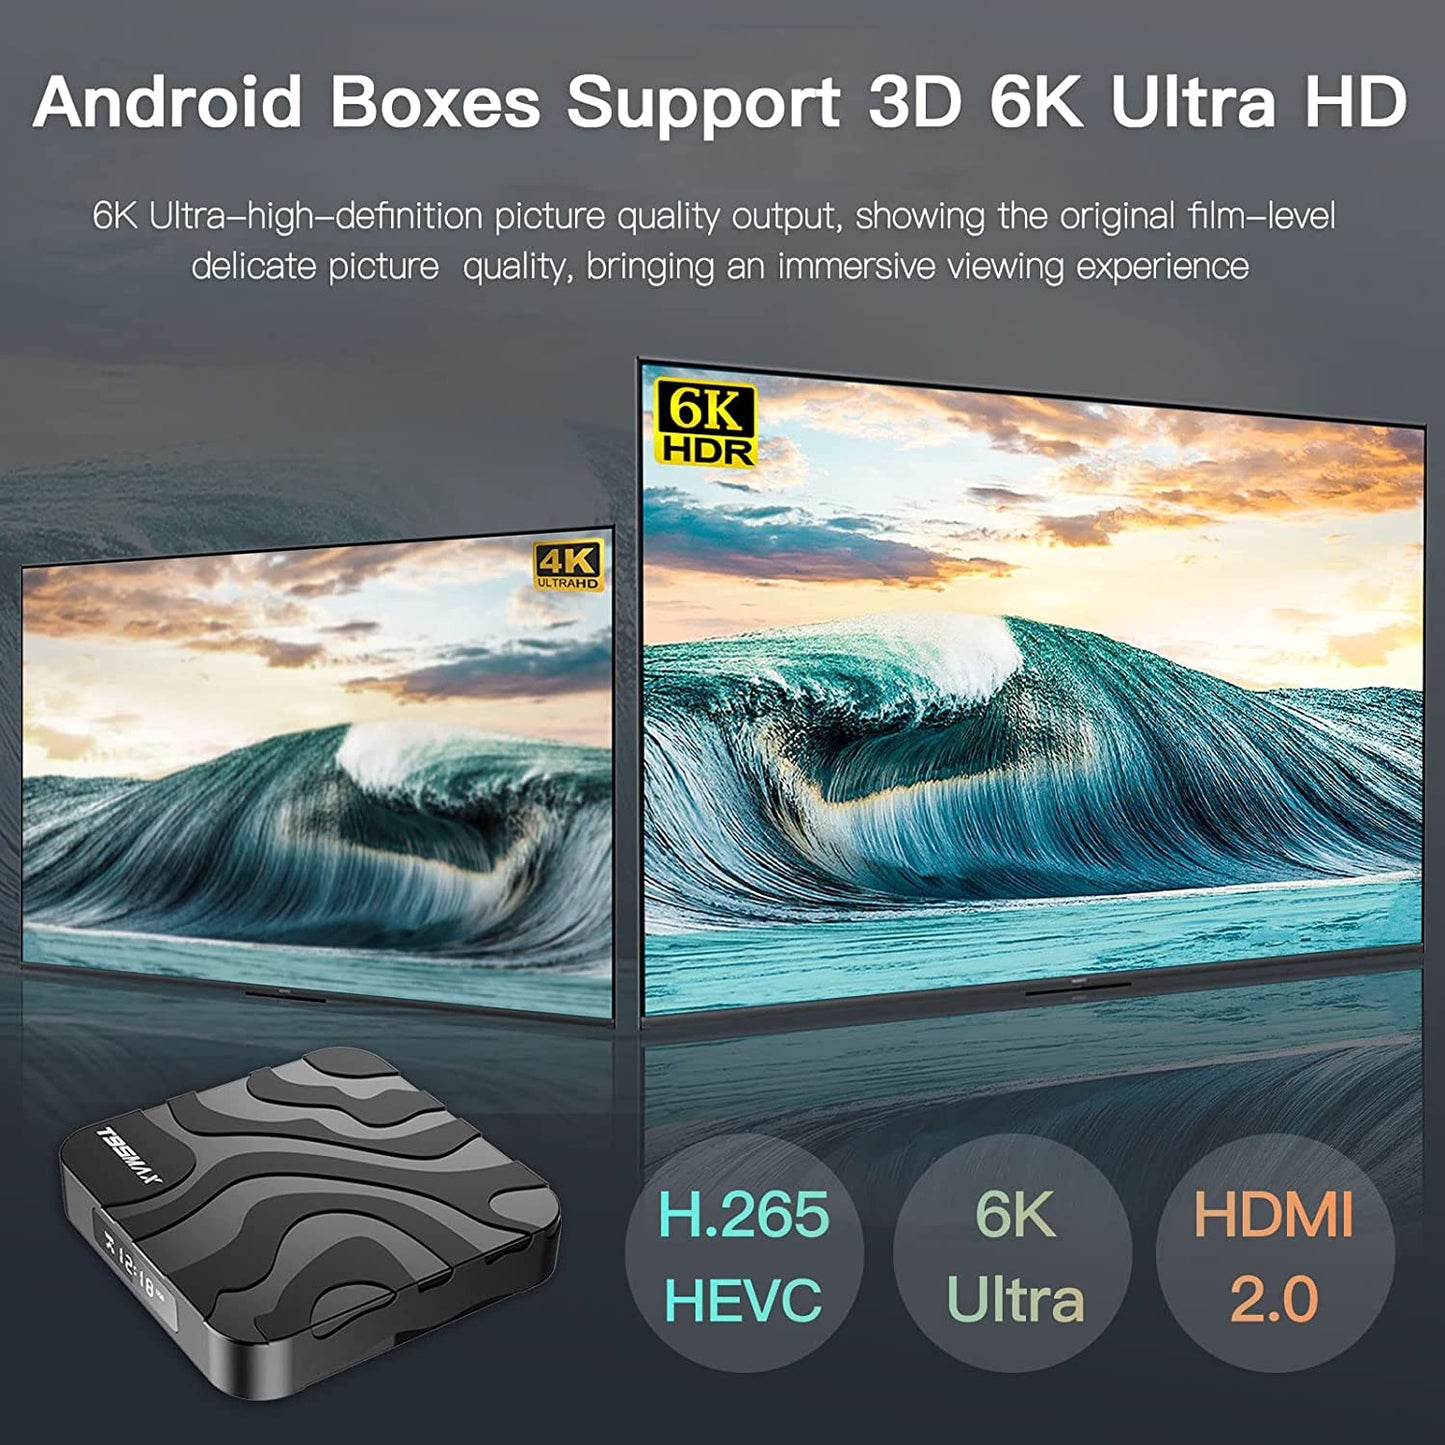 Android 12.0 TV Box, T95MAX Android Boxes with 2GB RAM 16GB ROM Quad-core H618 Support 4K6K Full HD 2.4Ghz/5.0Ghz Wi-Fi BT4.0 USB2.0 H.265 Decoding Smart TV Box EASYTONE Android Box 2023